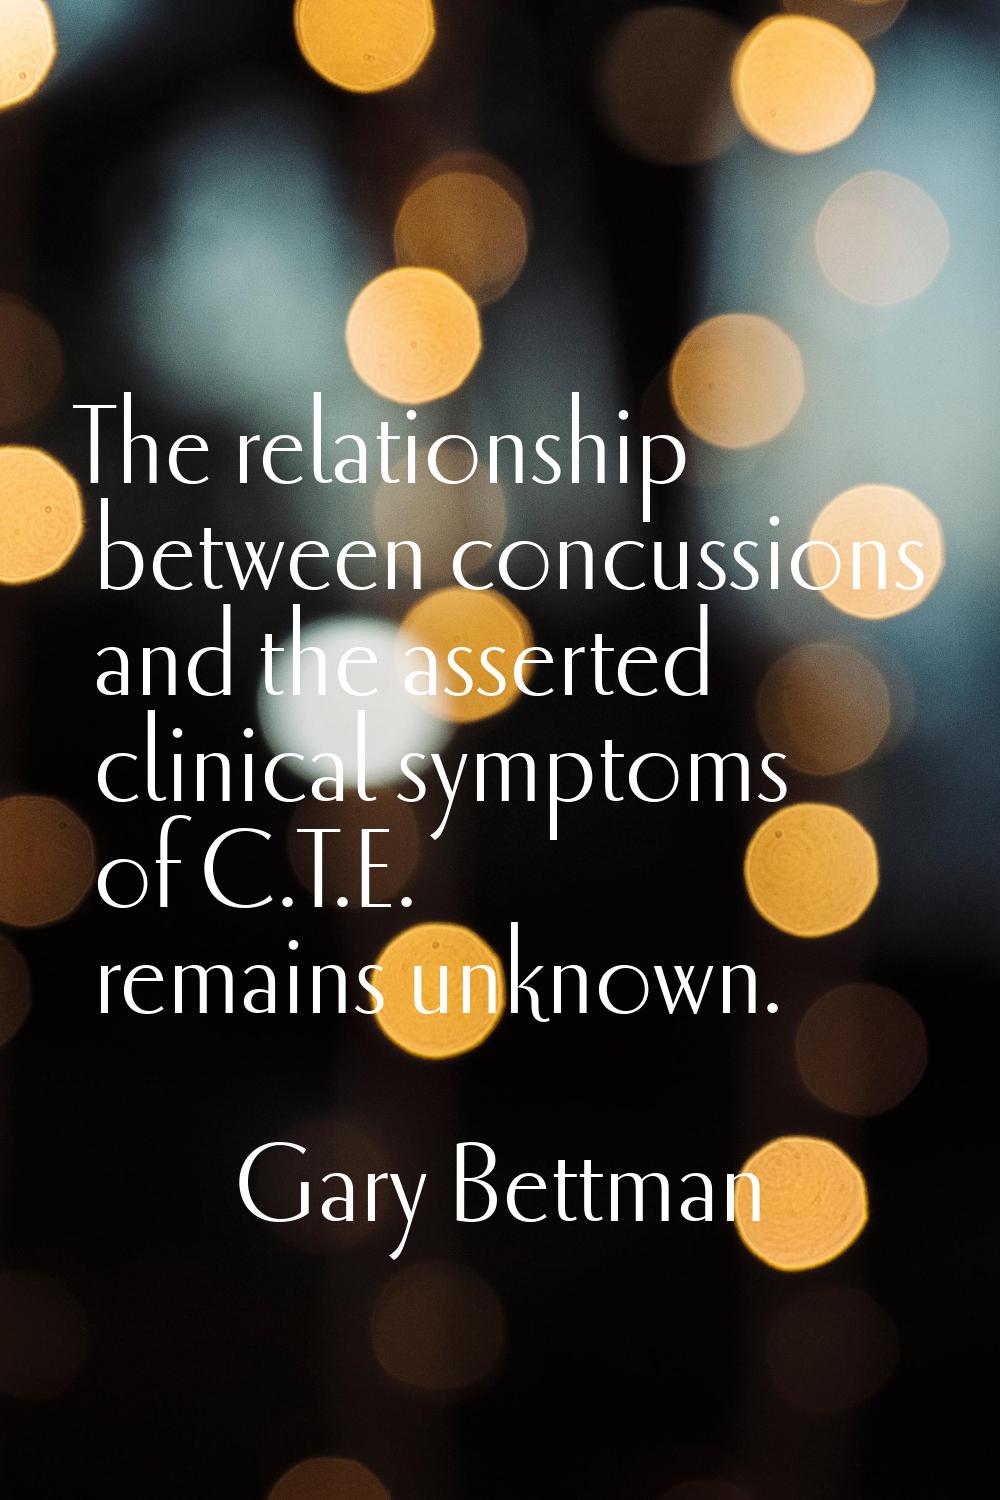 The relationship between concussions and the asserted clinical symptoms of C.T.E. remains unknown.